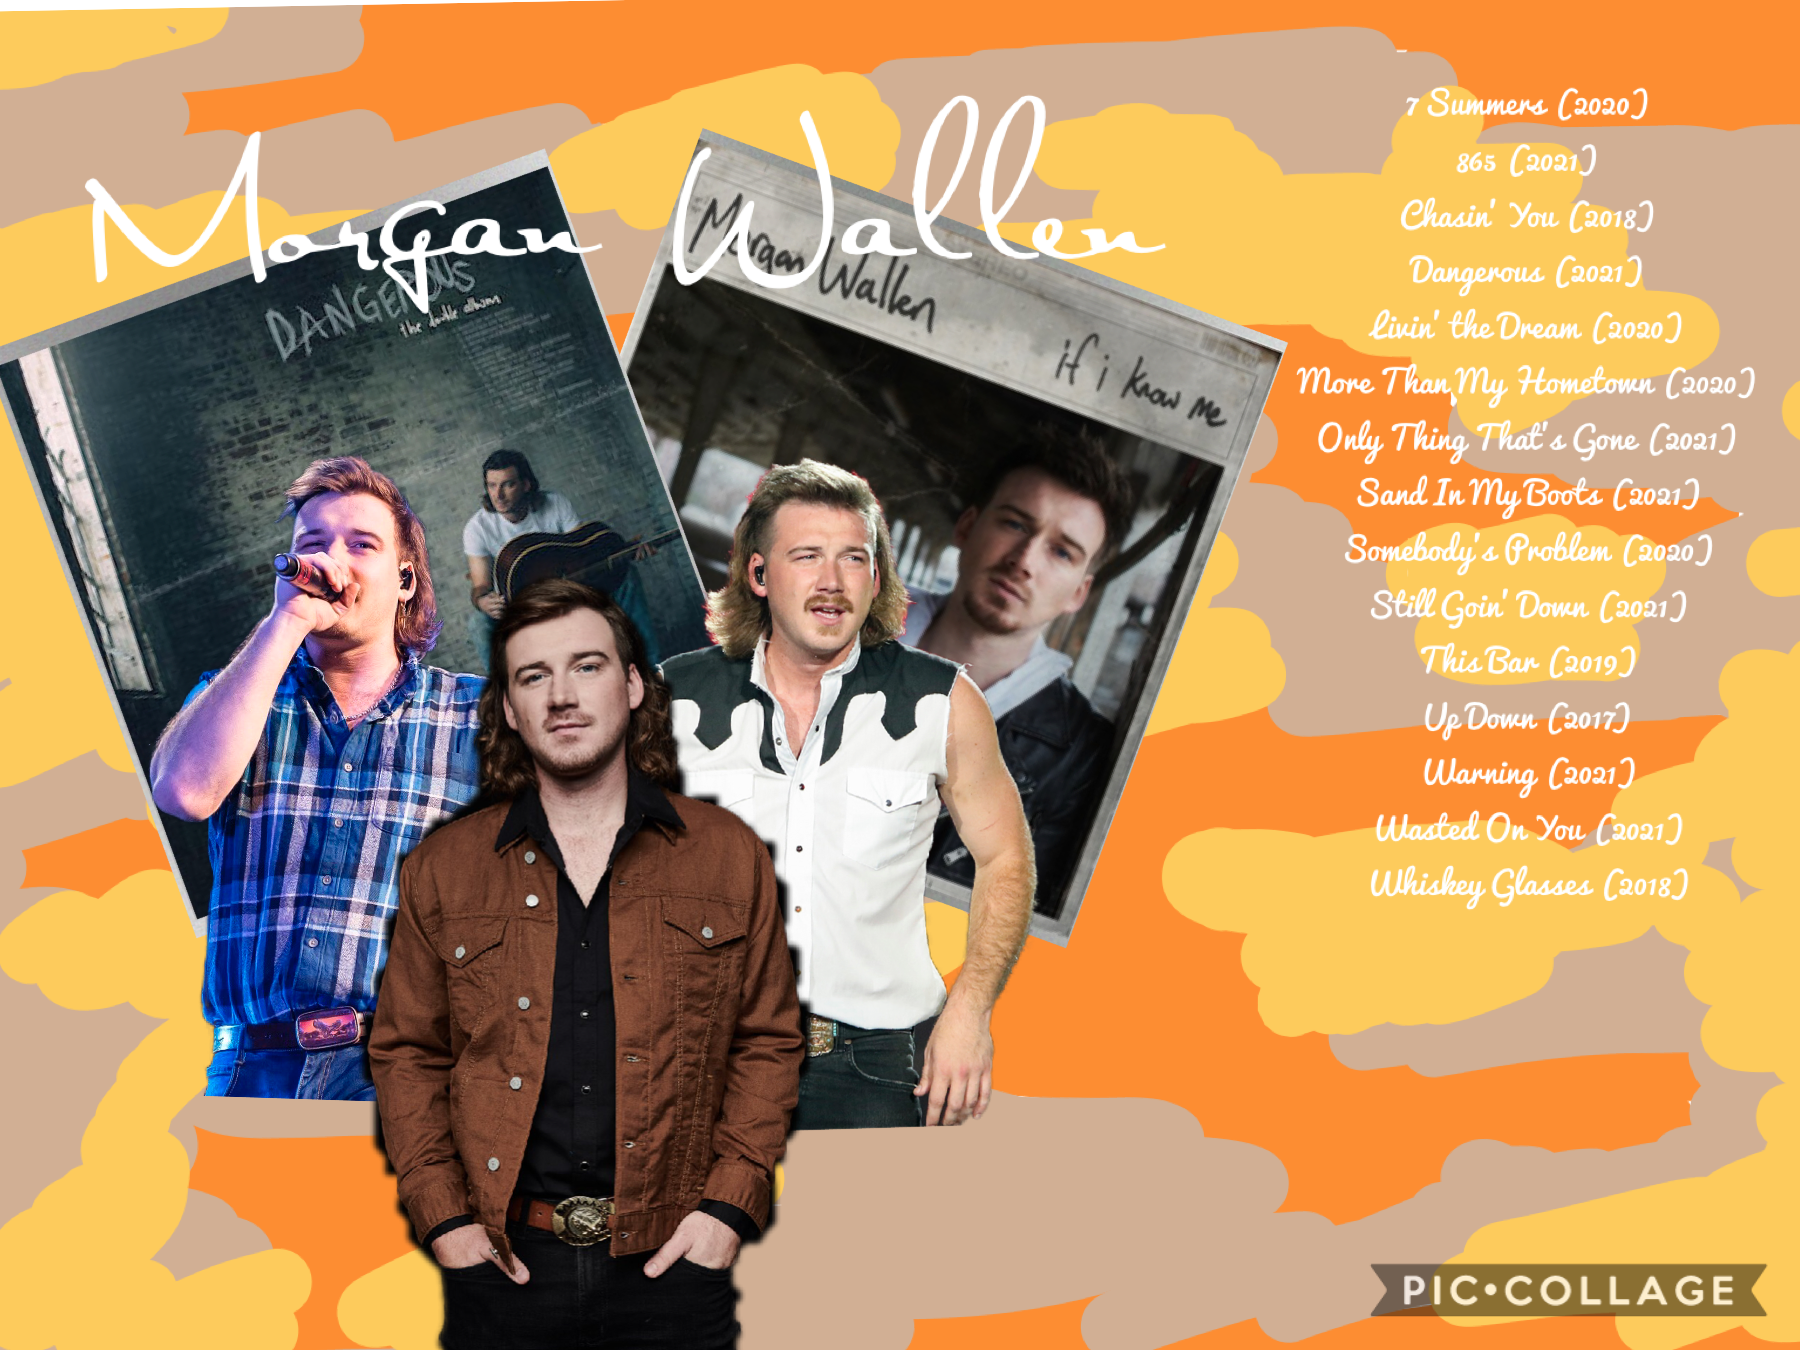 💕Morgan Wallen💕
This was fun to make I hope you enjoy it and give it a like